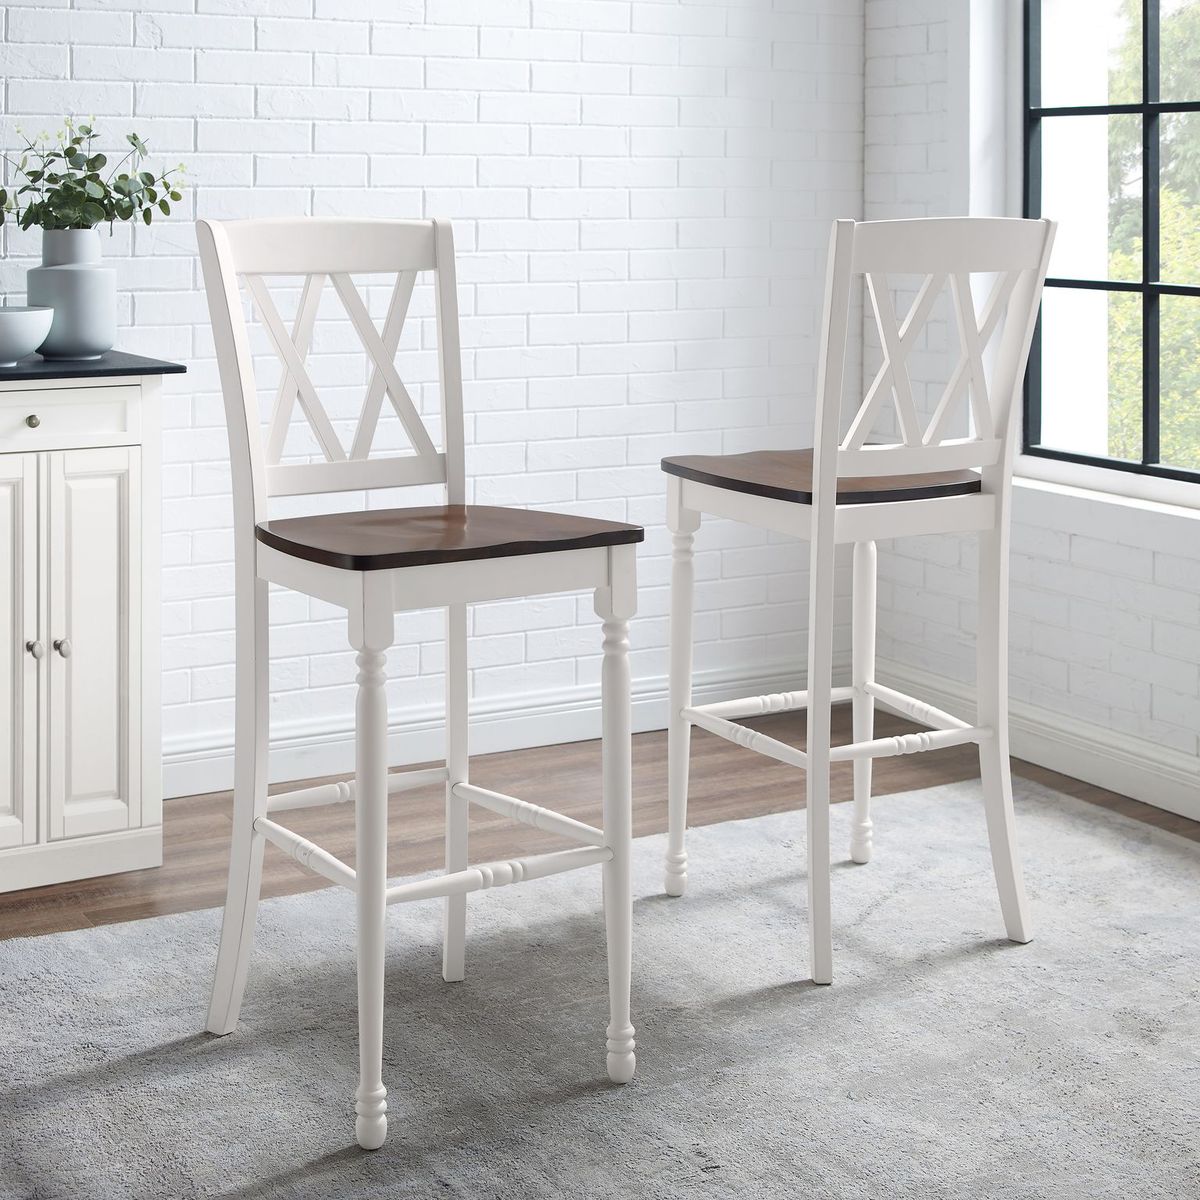 Picture of Crosley Furniture CF501030-WH Bar Stool Set, Distressed White - 2 Stools - 2 Piece